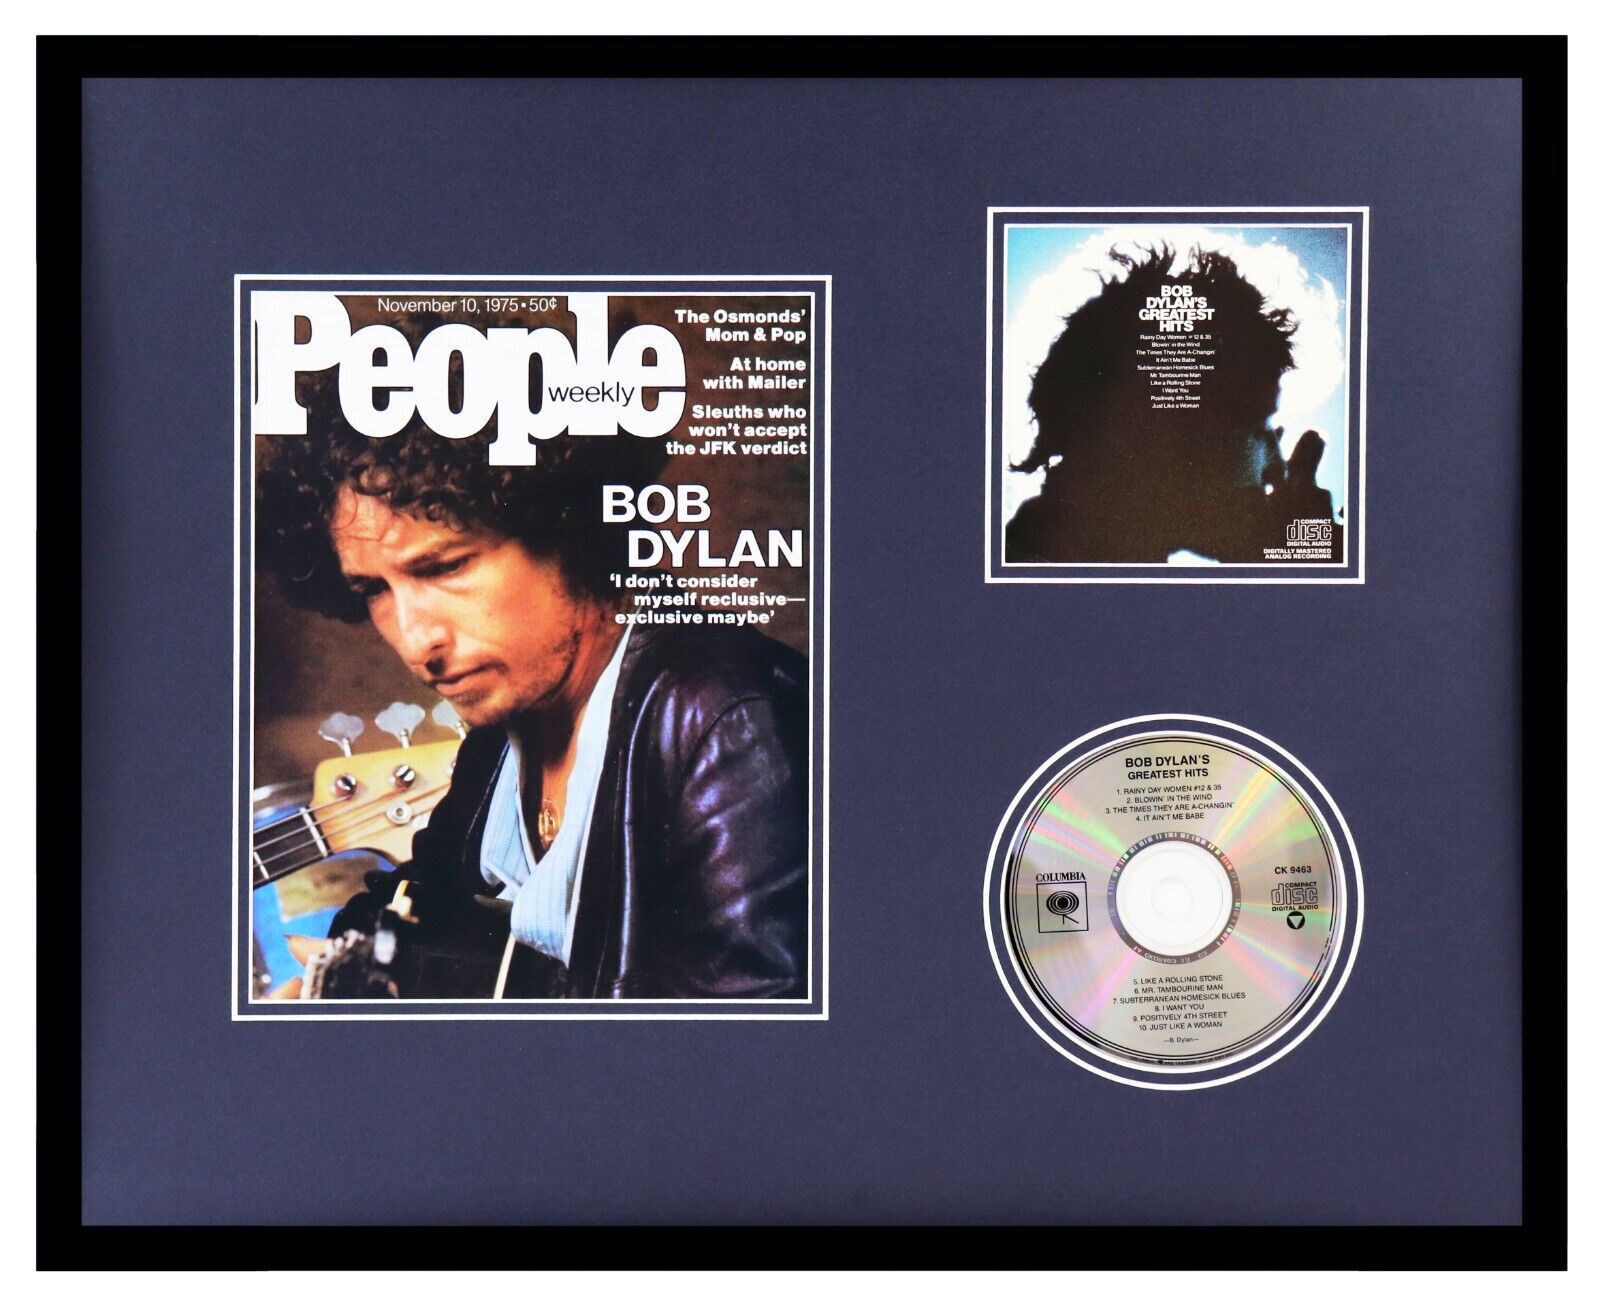 Bob Dylan Framed 16x20 Cd & People Magazine Cover Display